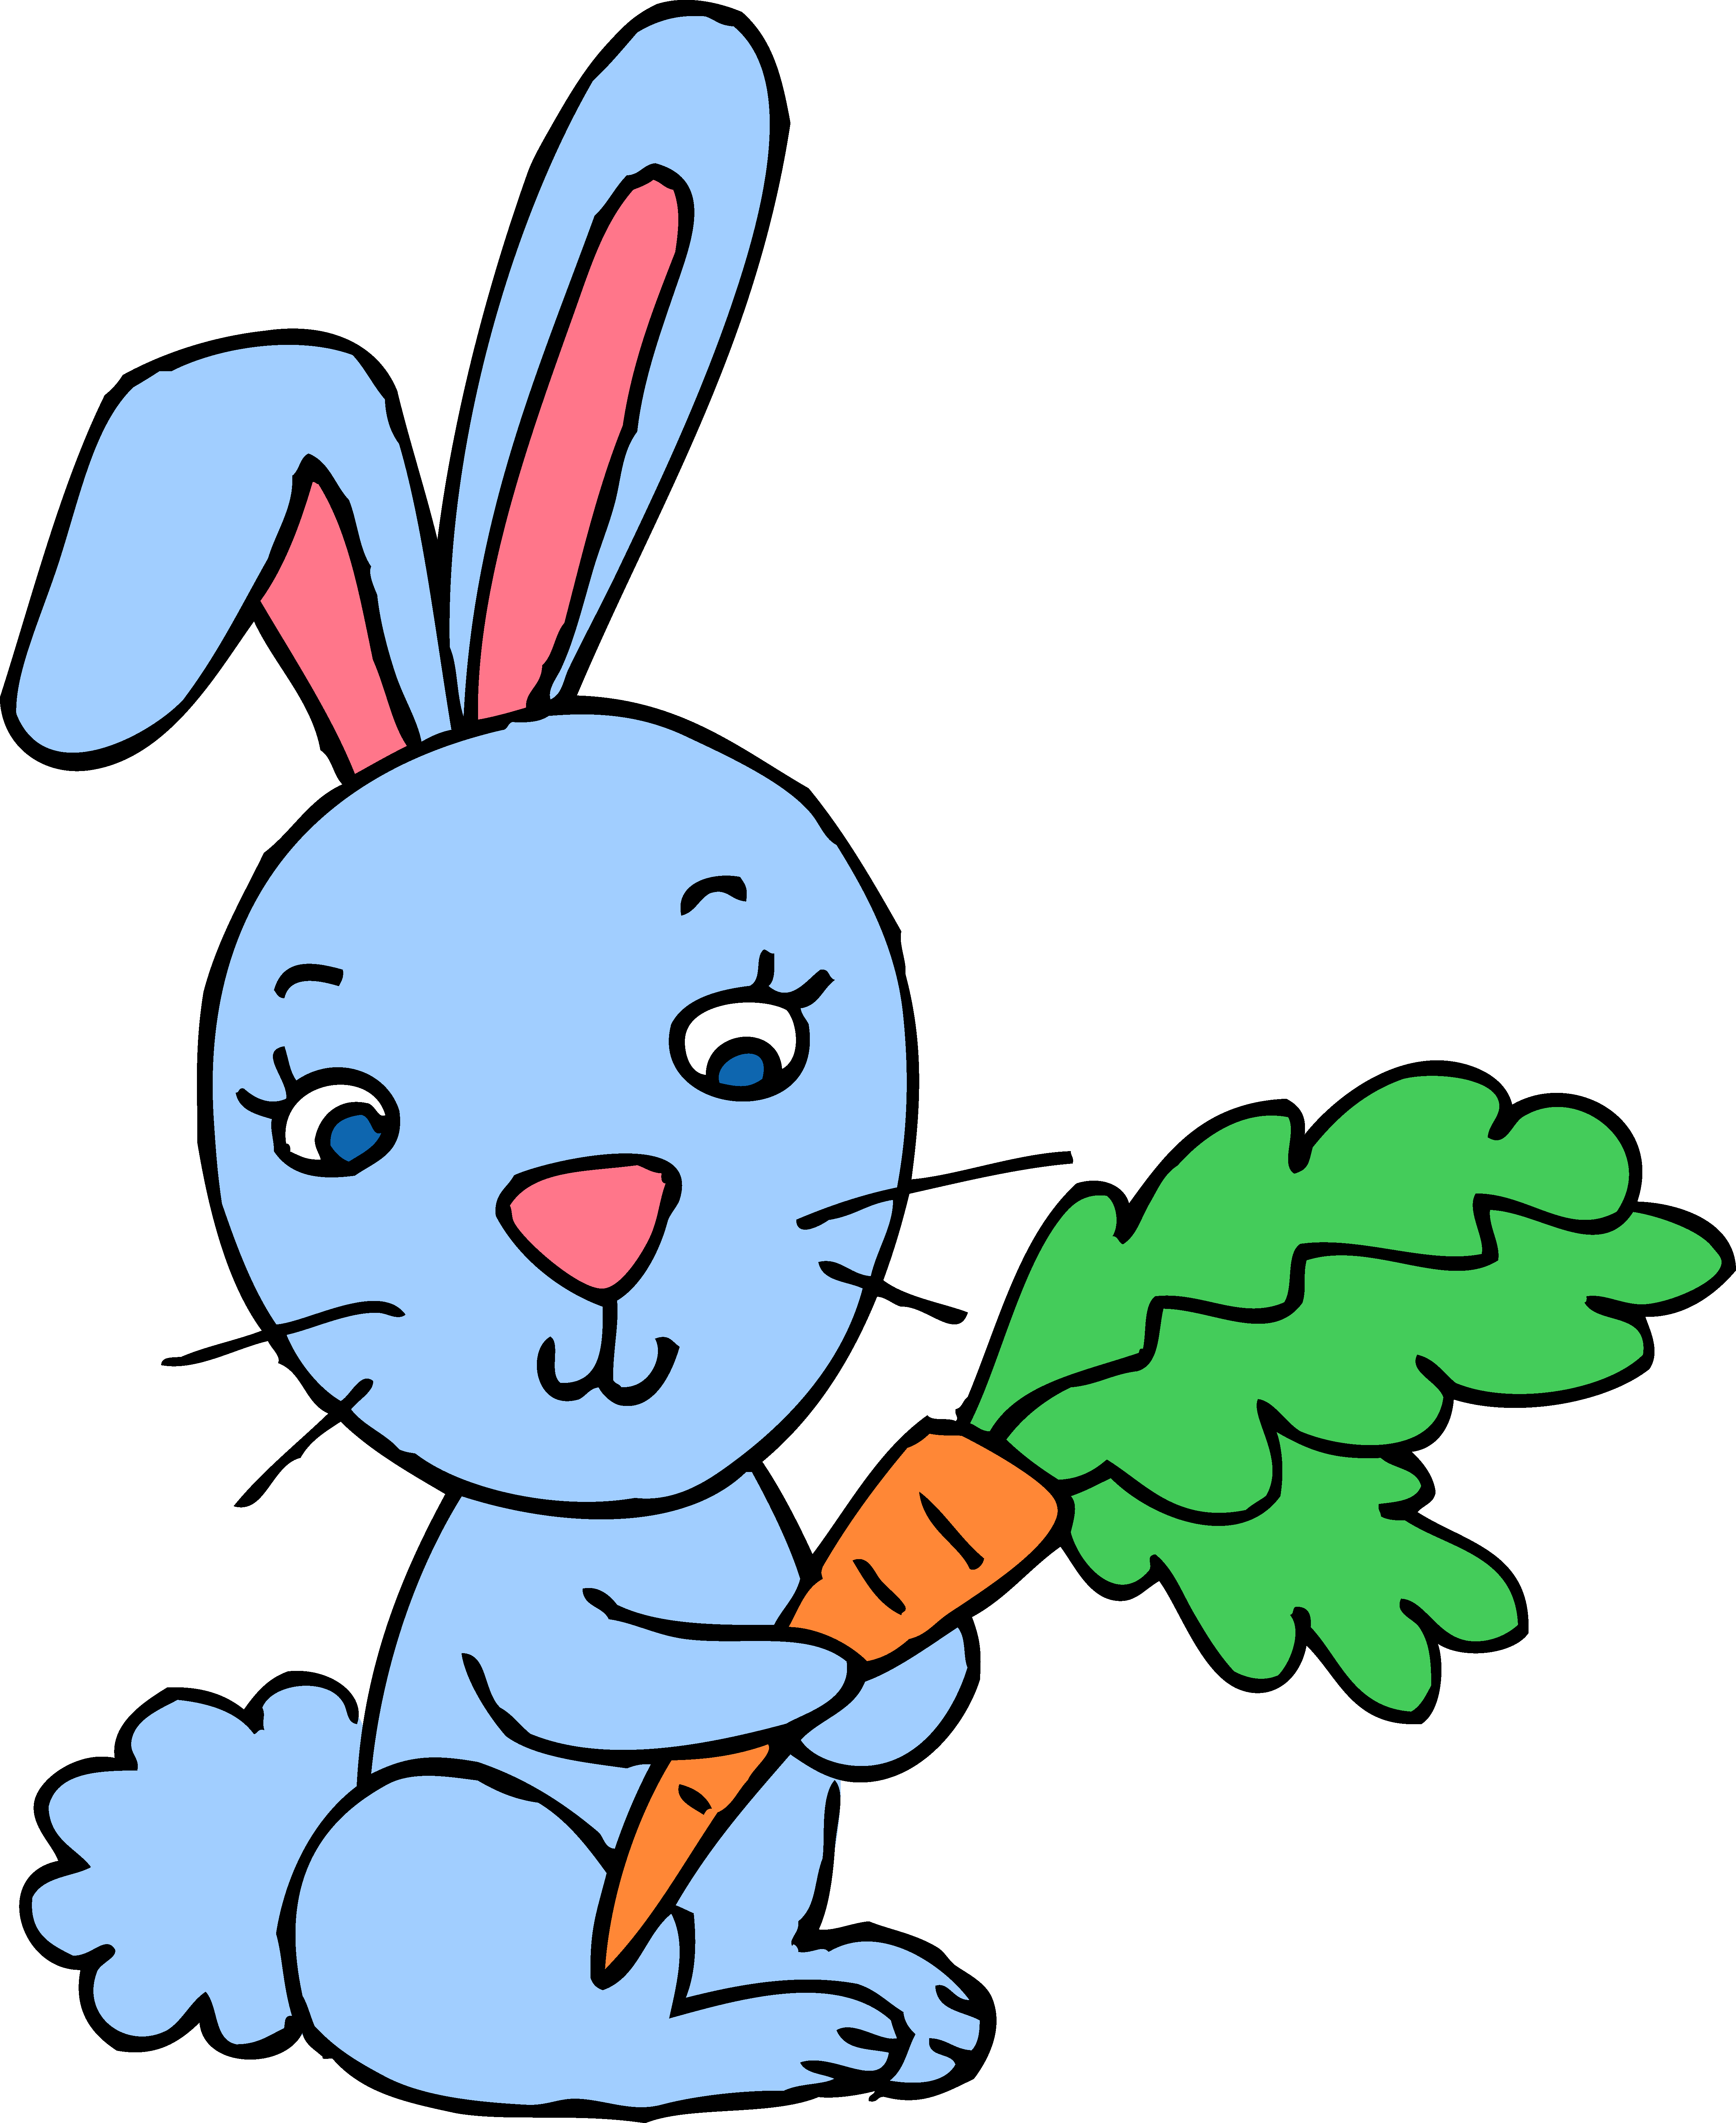 Dogs clipart easter. Bunny at getdrawings com